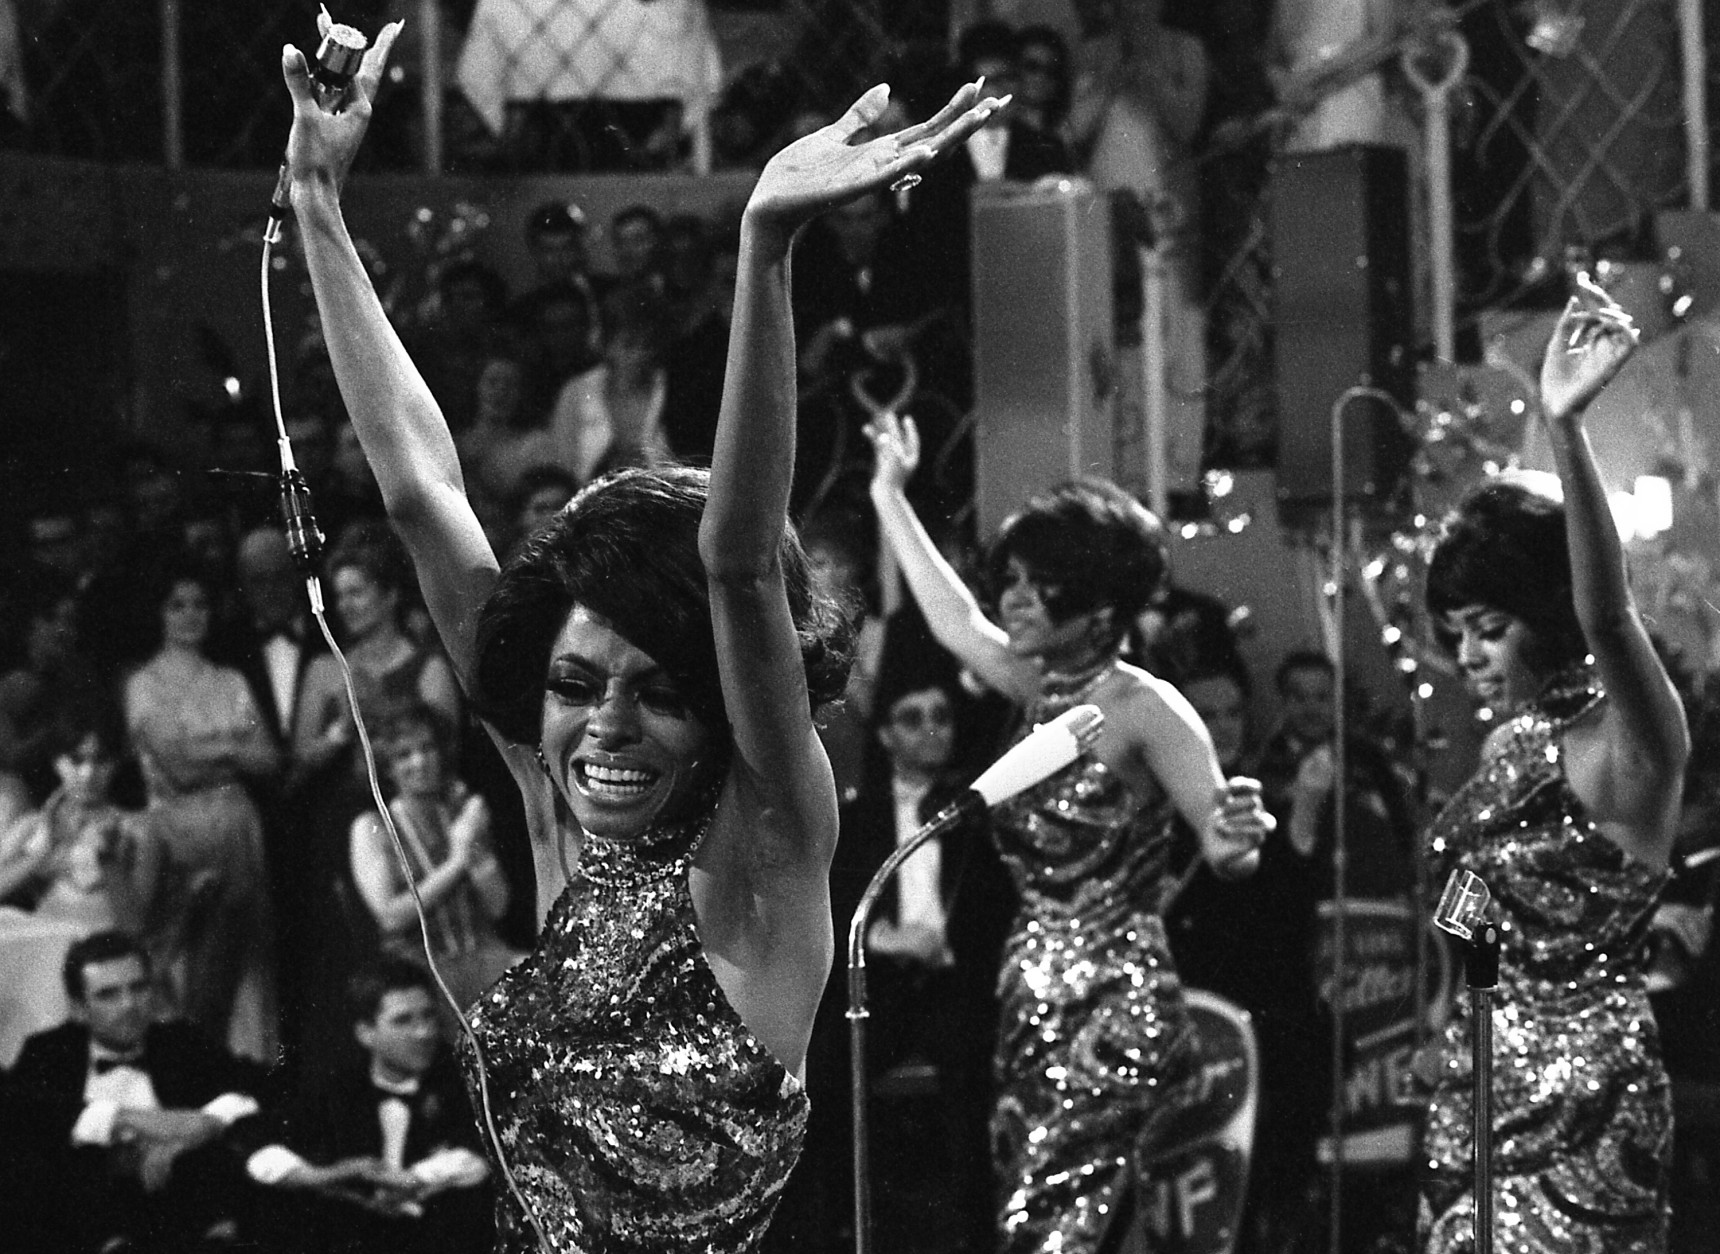 FILE -In this Jan. 21, 1968 file photo, The Supremes with Diana Ross, front, Cindy Birdsong and Mary Wilson dance with their arms in the air as they perform at the annual "Bal pare" party in Munich, West Germany. Ross, Wilson and the Florence Ballard made up the first successful configuration of the group. Cindy Birdsong replaced Ballard in 1967. Wilson, now 70, reminisced in an interview with Associated Press on June 12, 2014, about a major milestone: the 50th anniversary of the Supremes first No. 1, million-selling song, Where Did Our Love Go - released June 17, 1964.  (AP Photo/Frings, file)